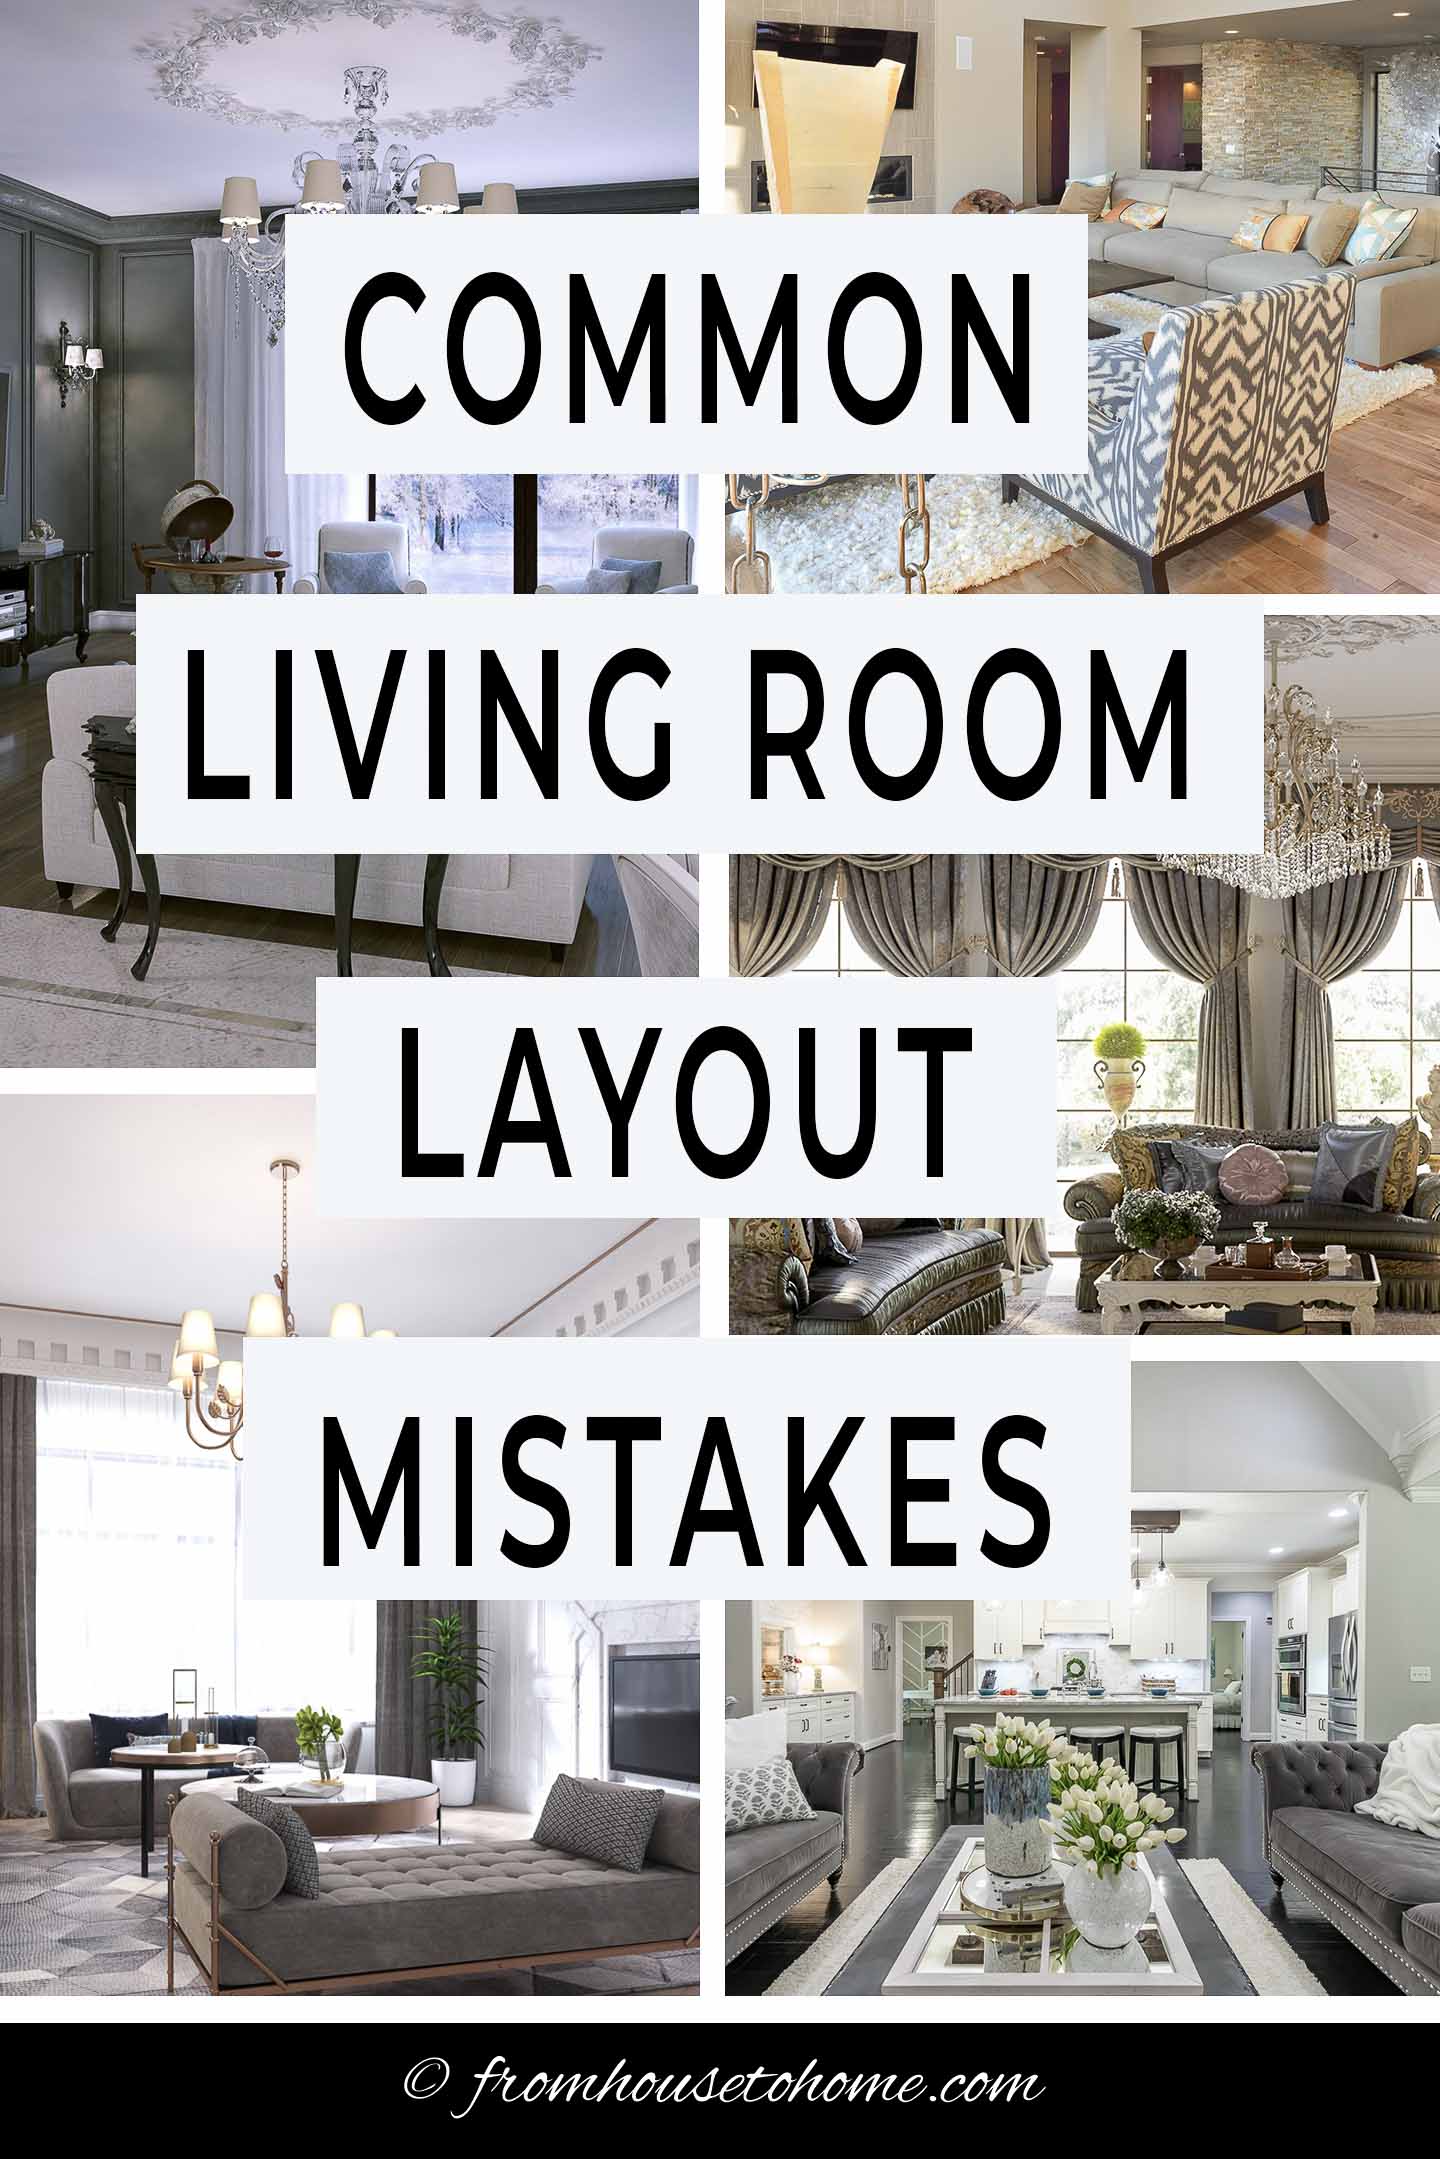 Living room layout mistakes (and how to fix them)